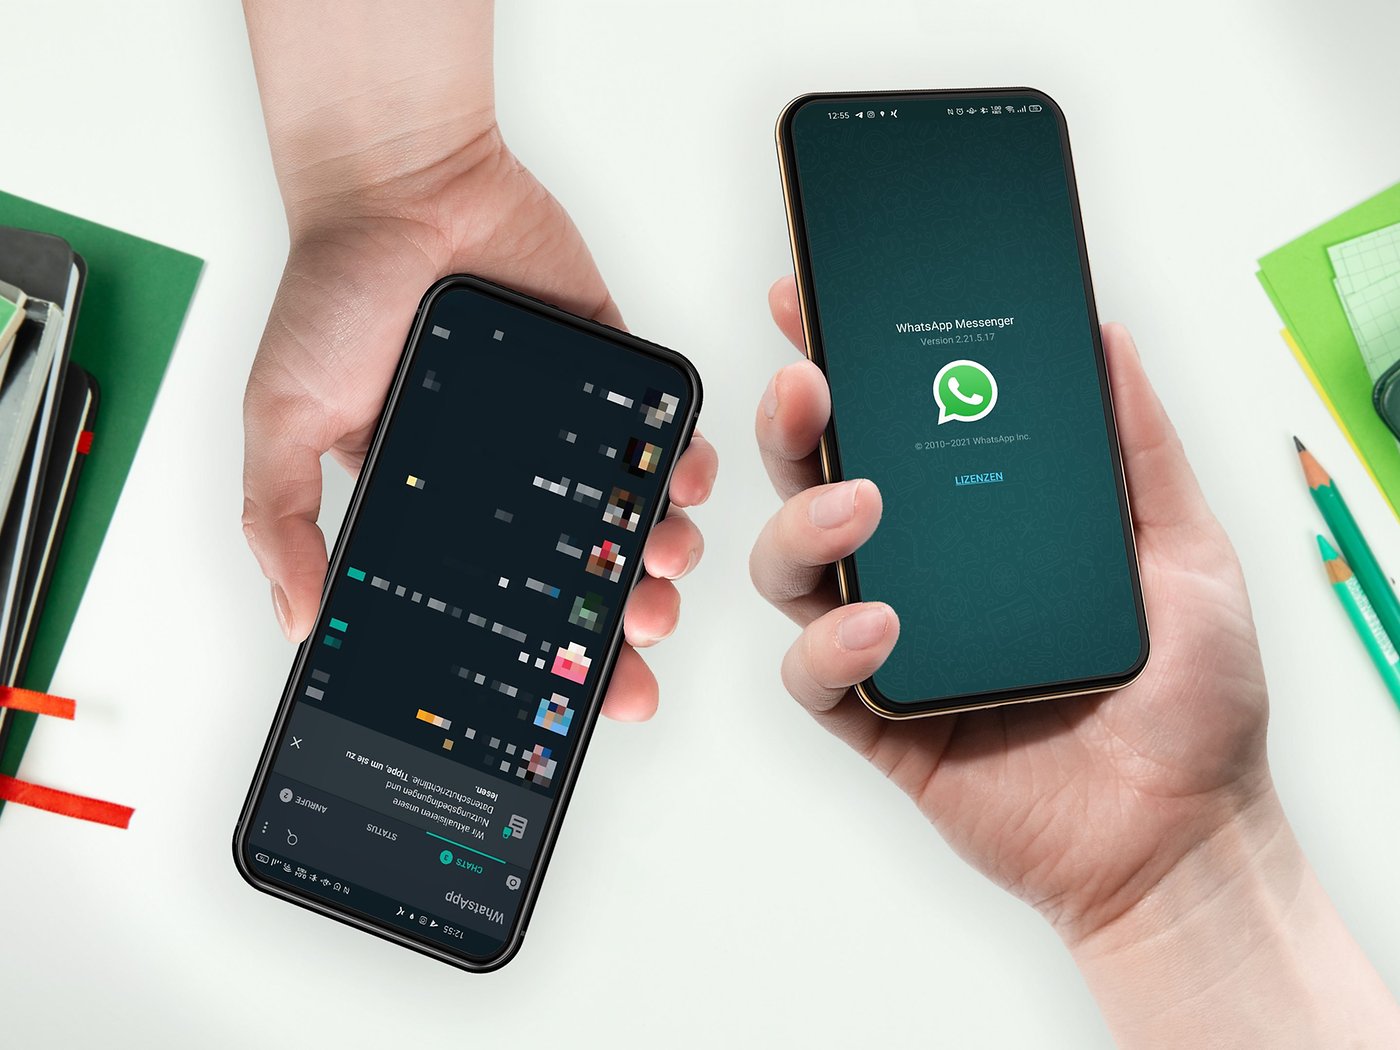 WhatsApp will Soon Allow You to Use the Same Account on Multiple Phones